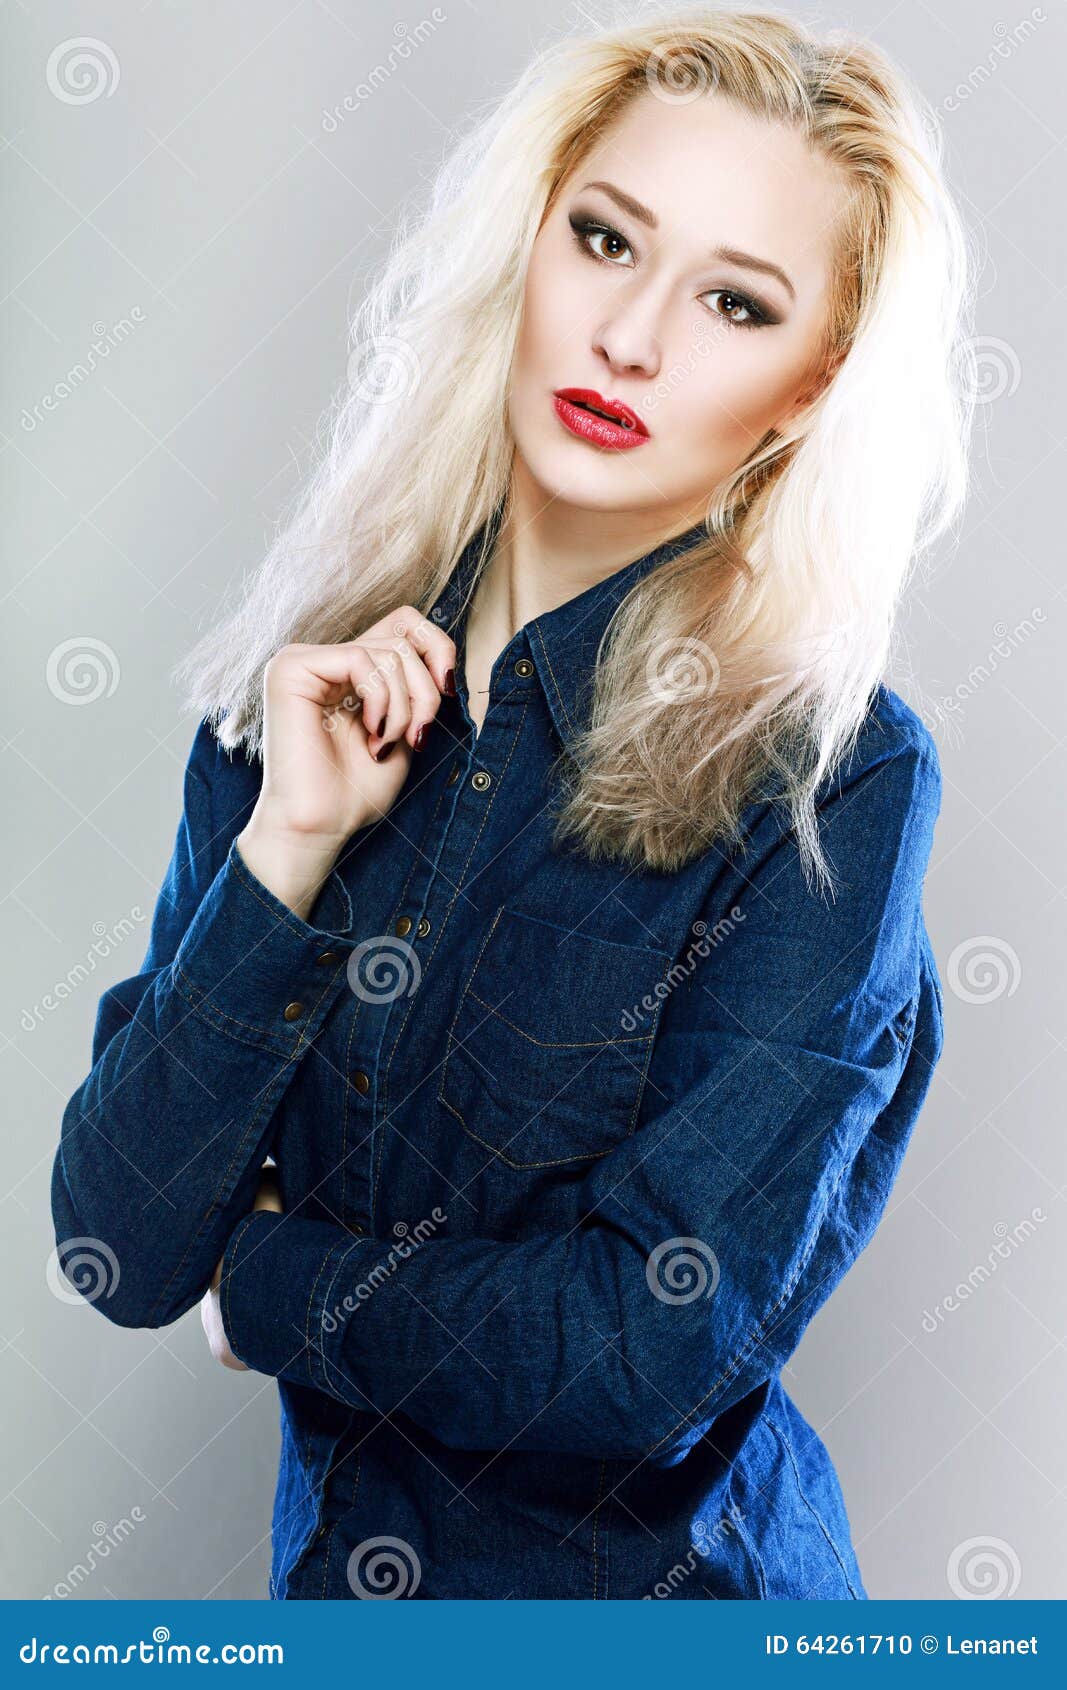 Blond woman in jeans stock photo. Image of lady, adult - 64261710